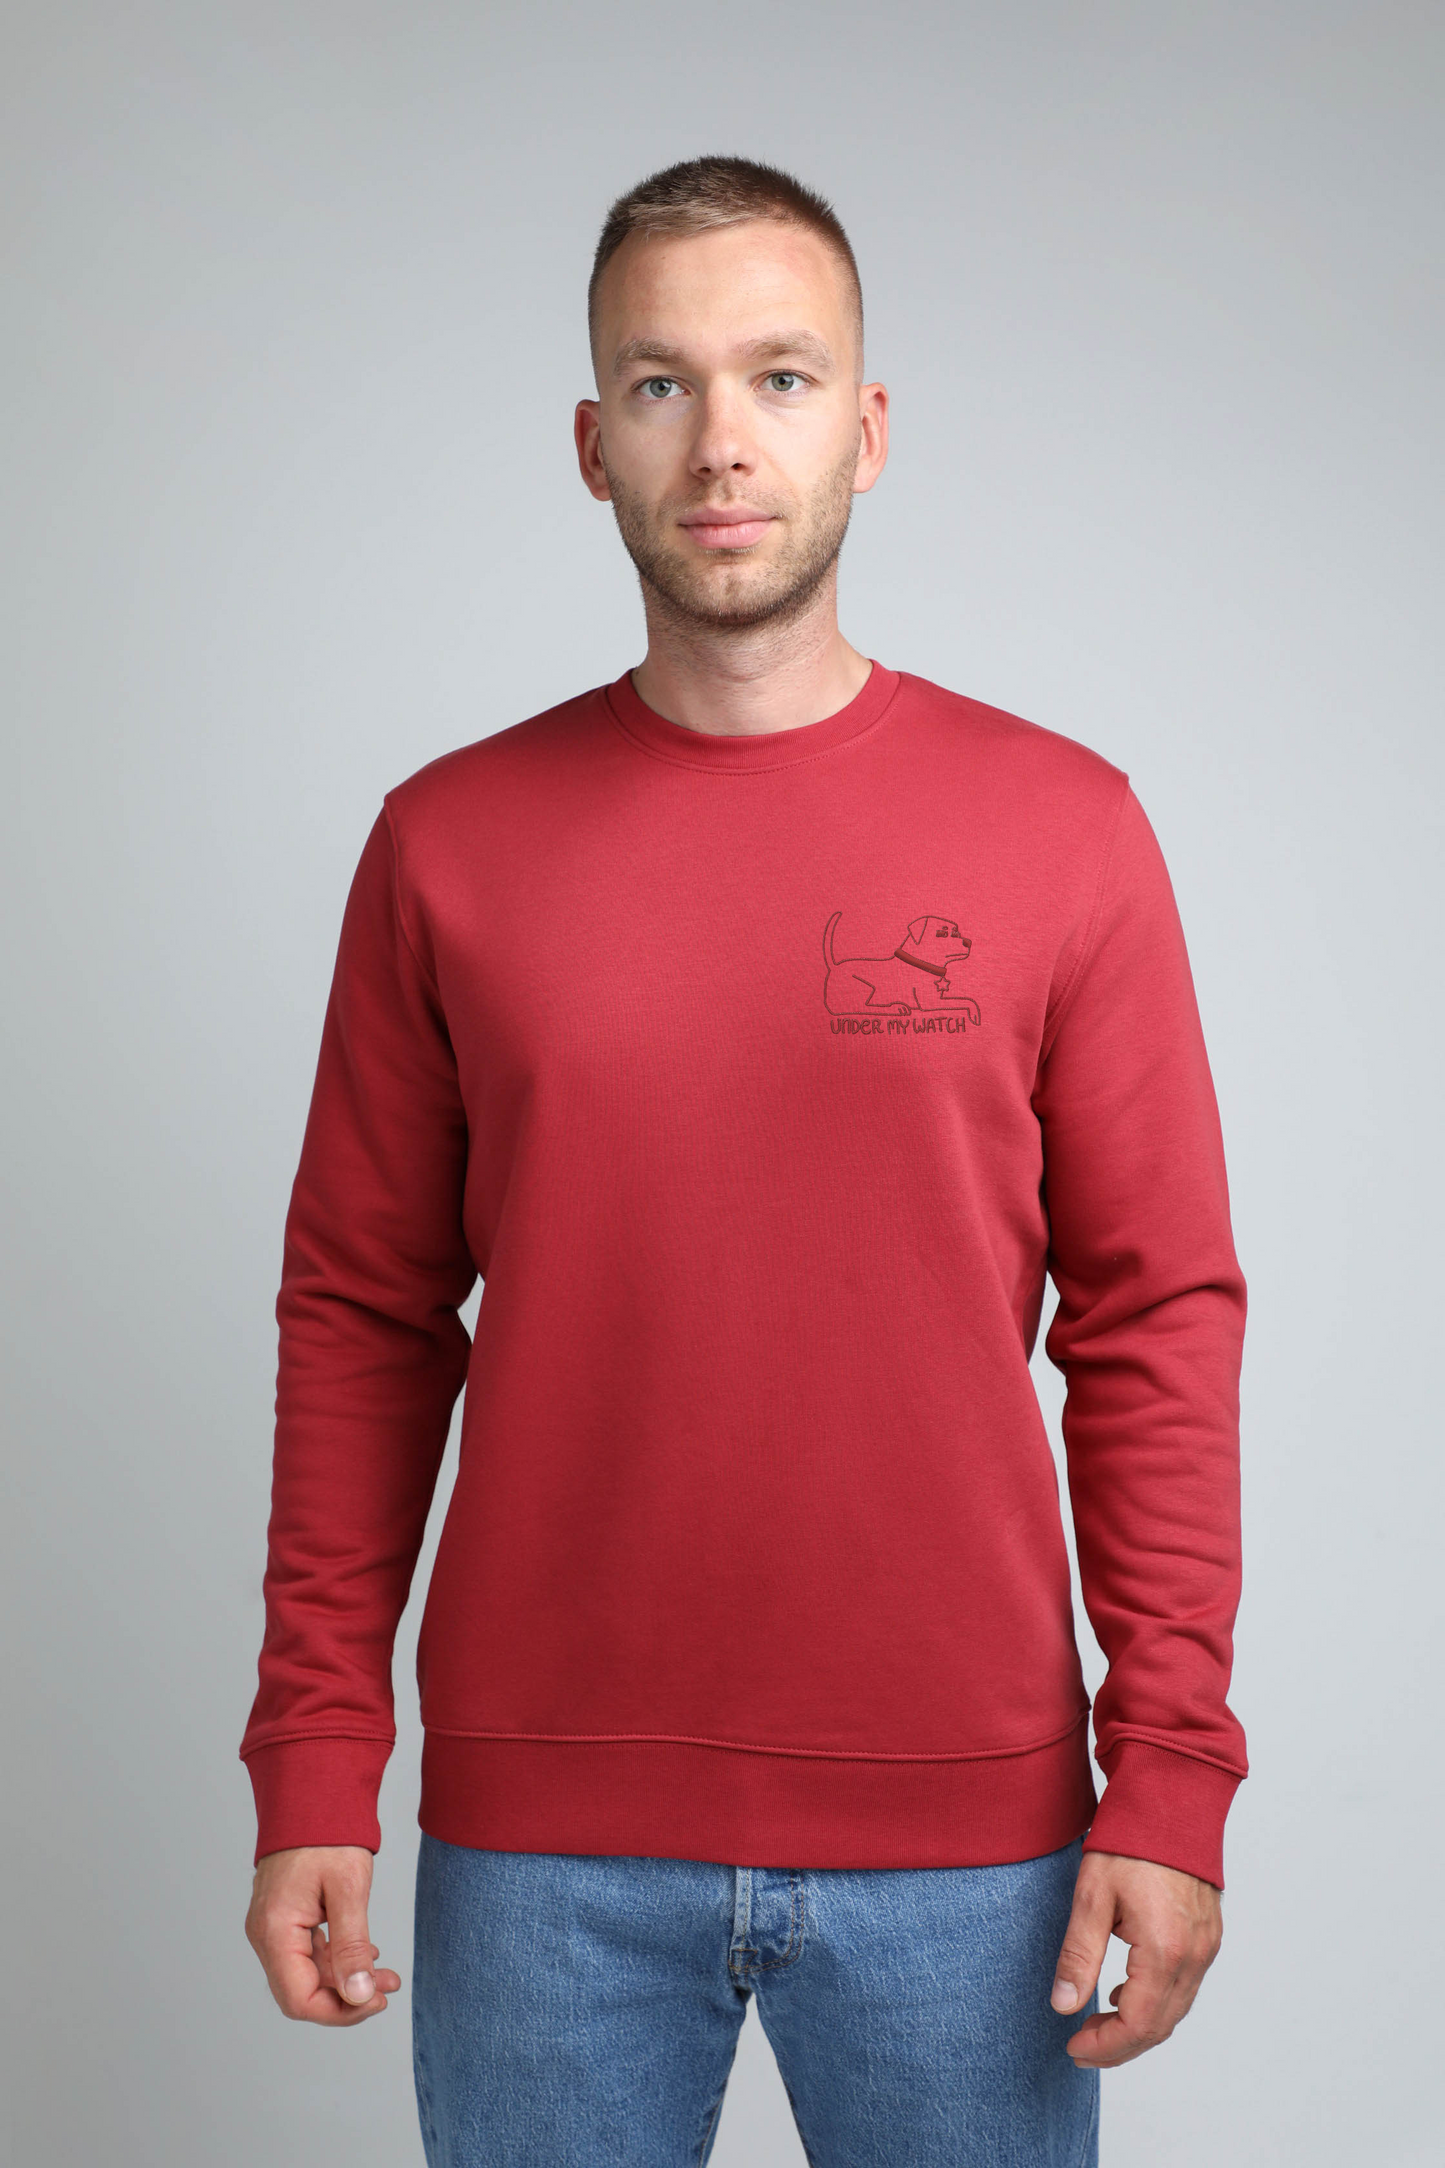 XL available only | Under my watch | Crew neck sweatshirt with embroidered dog. Regular fit | Unisex - premium dog goods handmade in Europe by animalistus